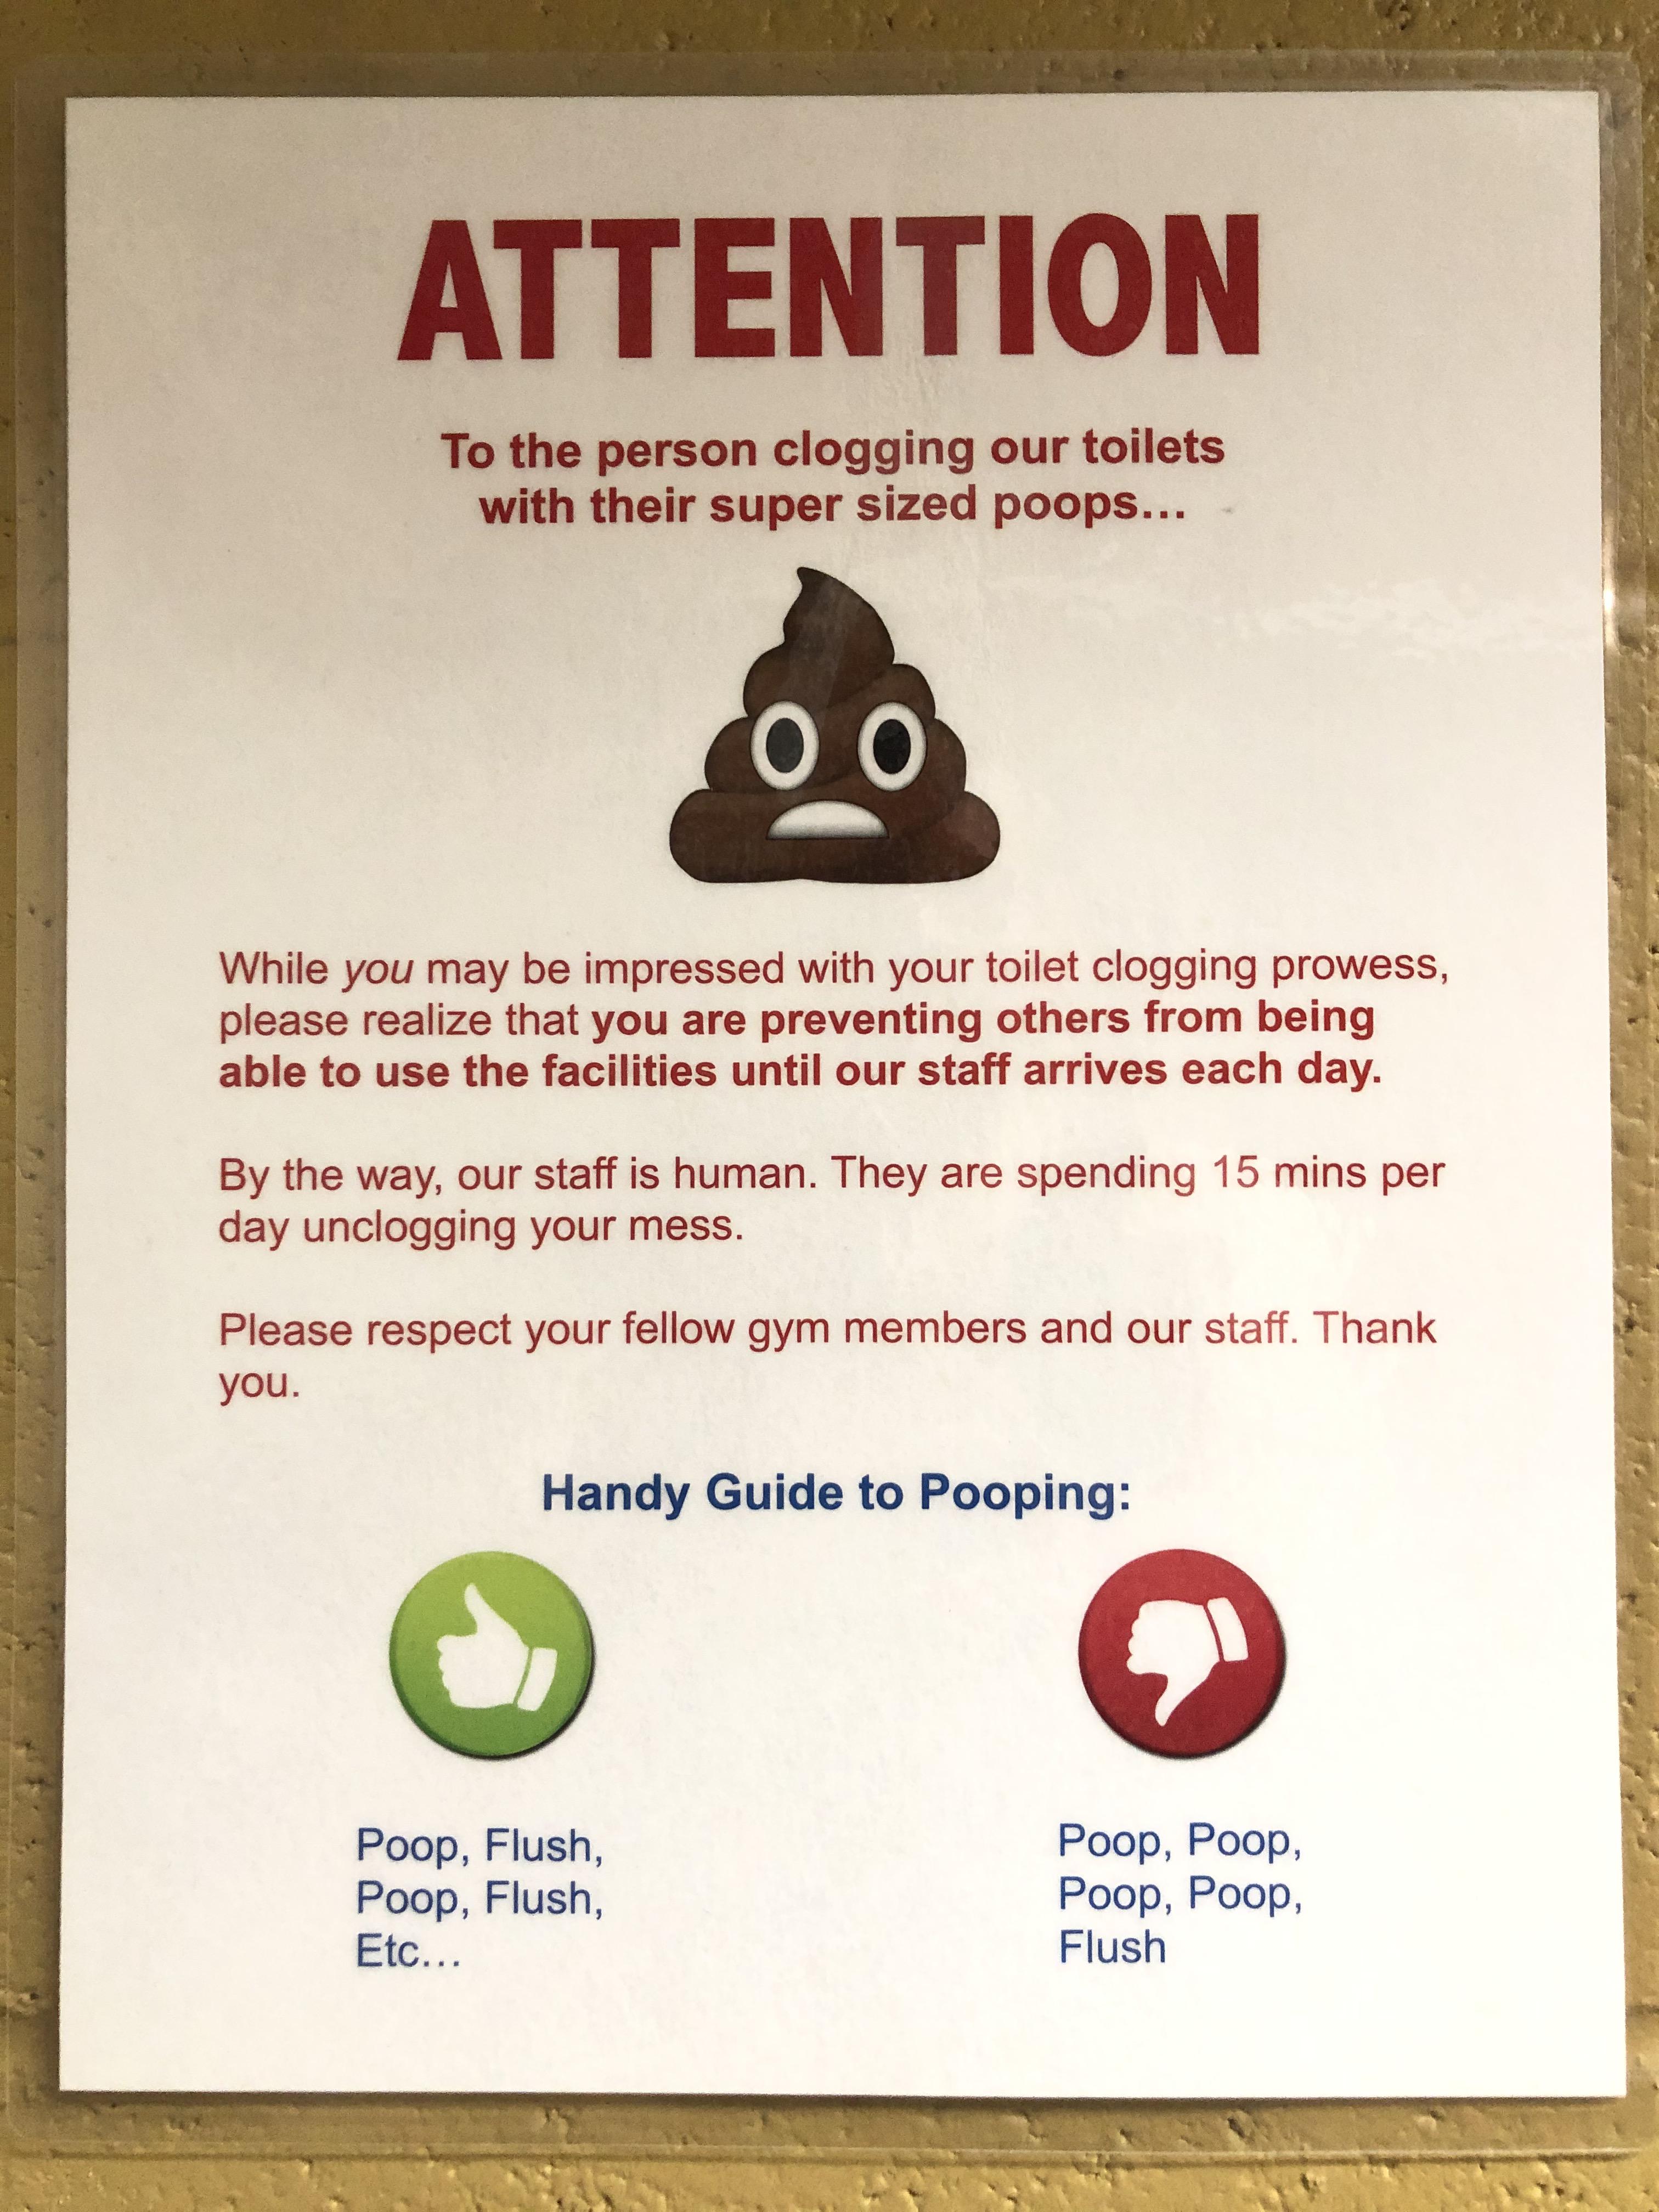 poster - Attention To the person clogging our toilets with their super sized poops... 00 While you may be impressed with your toilet clogging prowess please realize that you are preventing others from being able to use the facilities until our staff arriv